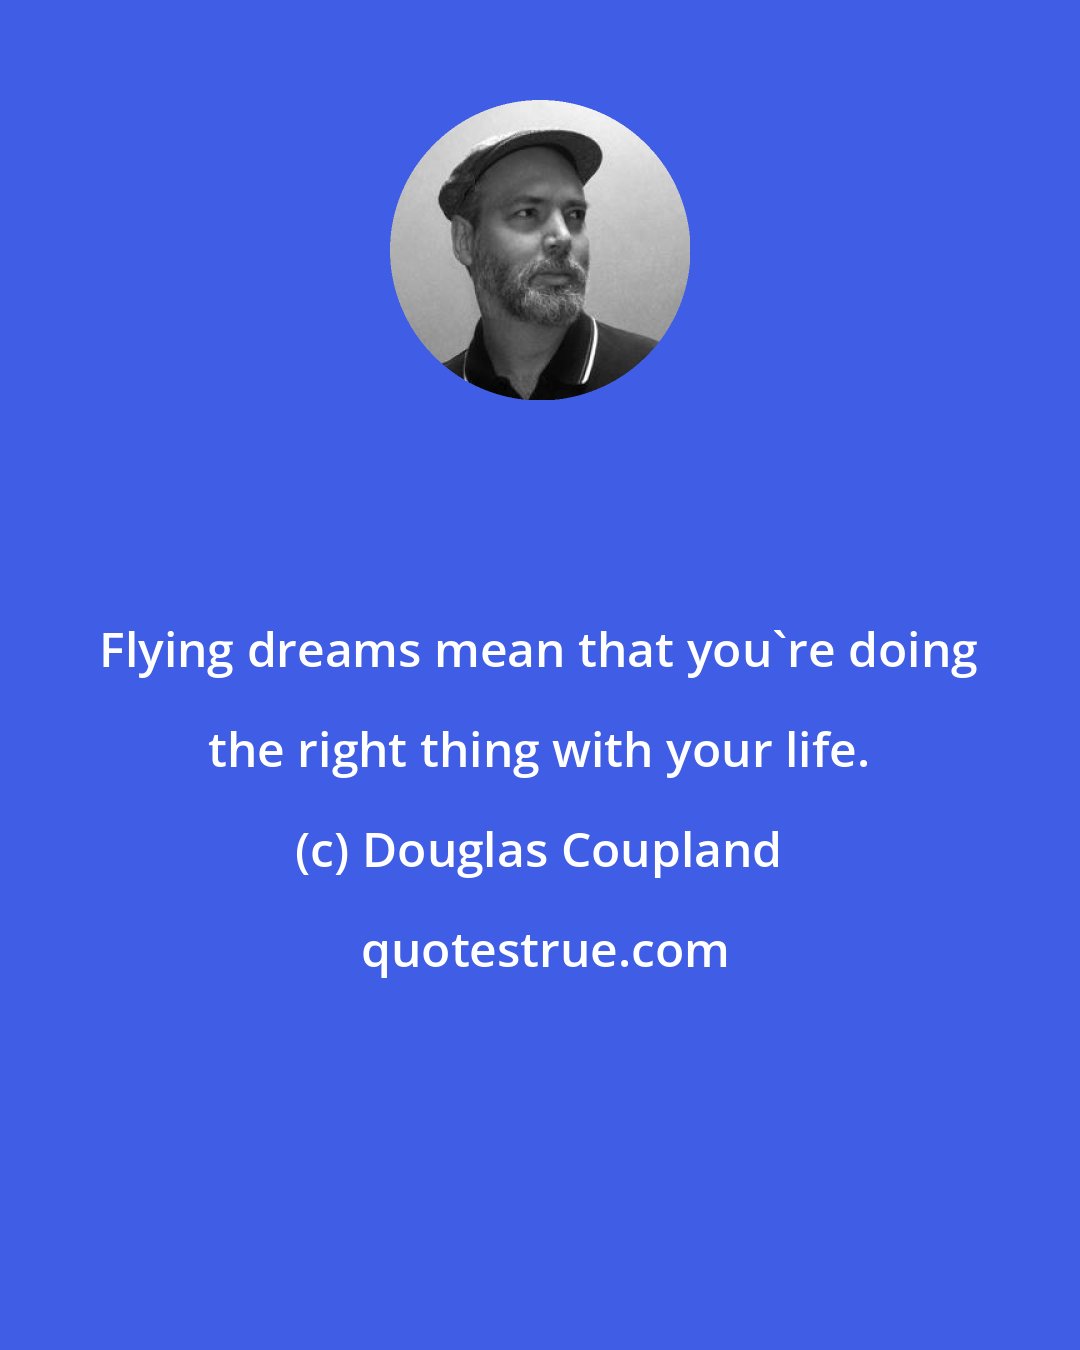 Douglas Coupland: Flying dreams mean that you're doing the right thing with your life.